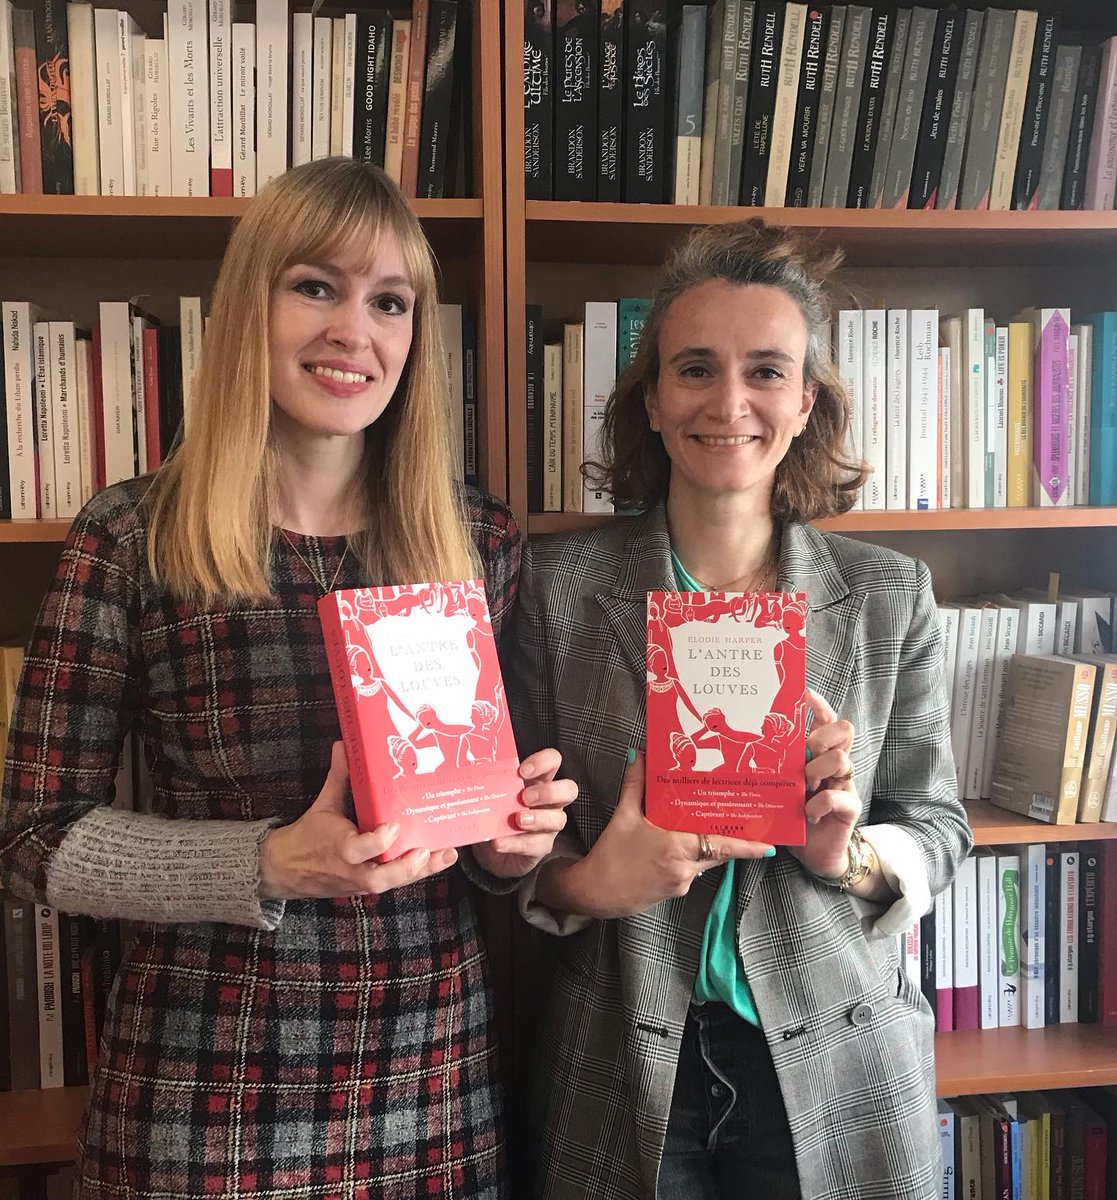 .@ElodieITV recently popped over to Paris to meet her amazing French publishing team at @calmann_levy! #TheWolfDen is now published in 19 territories across the globe. Have you snagged your copy yet? If so, what language is it in? 🇫🇷🌎🌍🌏